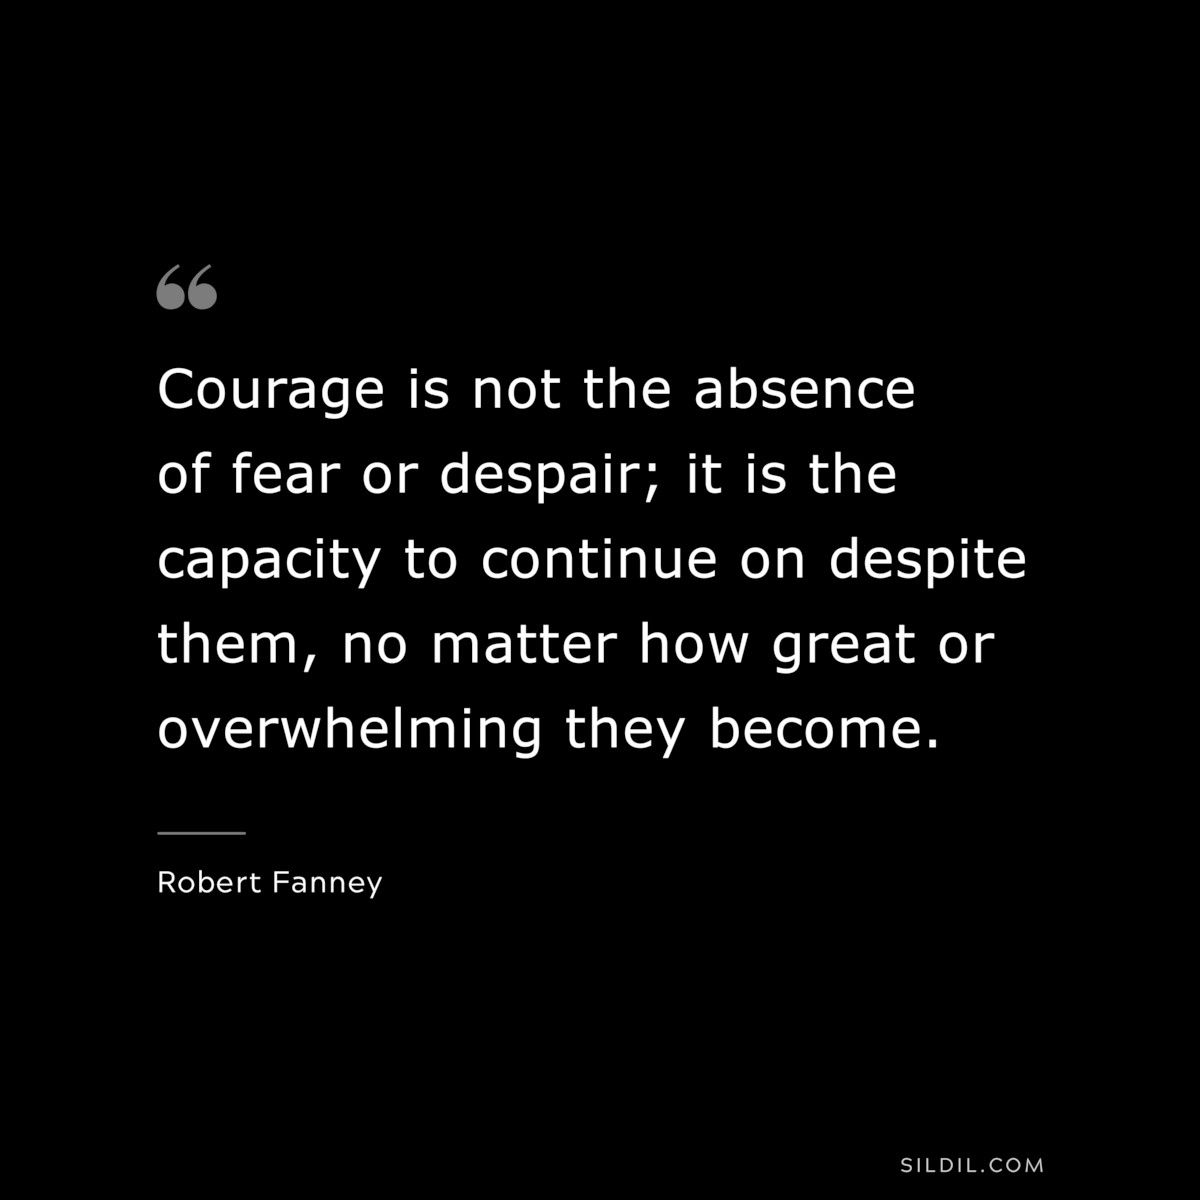 Courage is not the absence of fear or despair; it is the capacity to continue on despite them, no matter how great or overwhelming they become. ― Robert Fanney